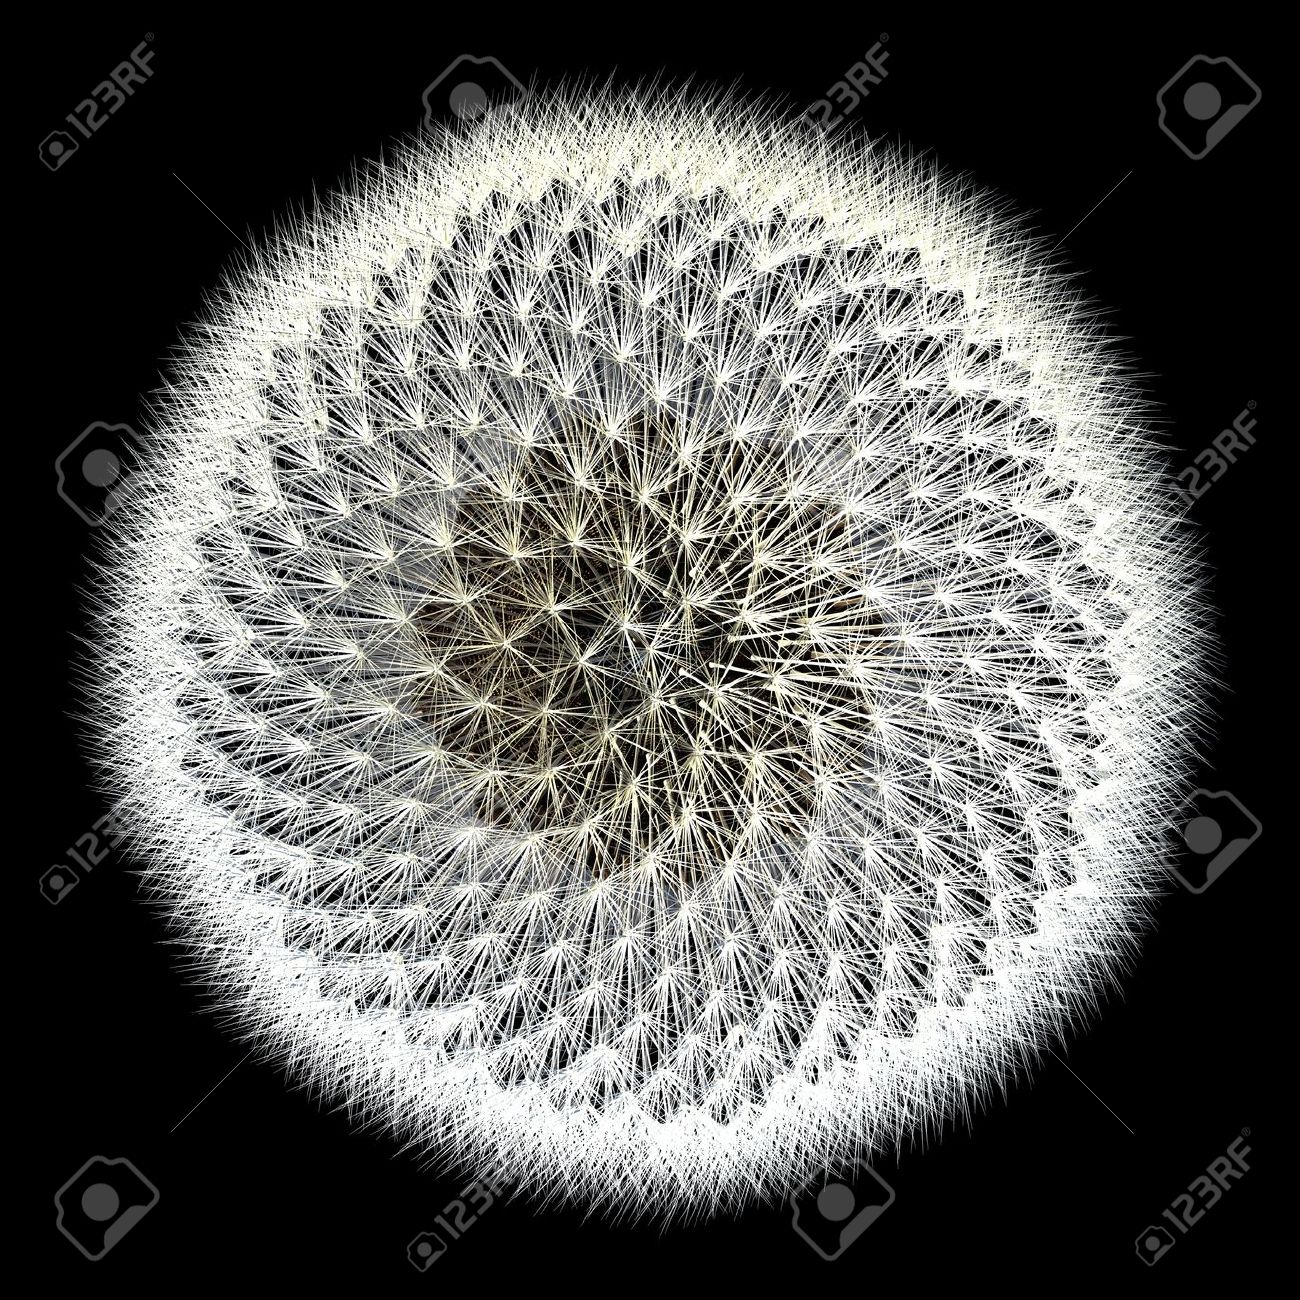 13117221-Experiments-with-the-golden-ratio-top-view-of-dandelion-seeds-with-black-background-Notice-the-spira-Stock-Photo